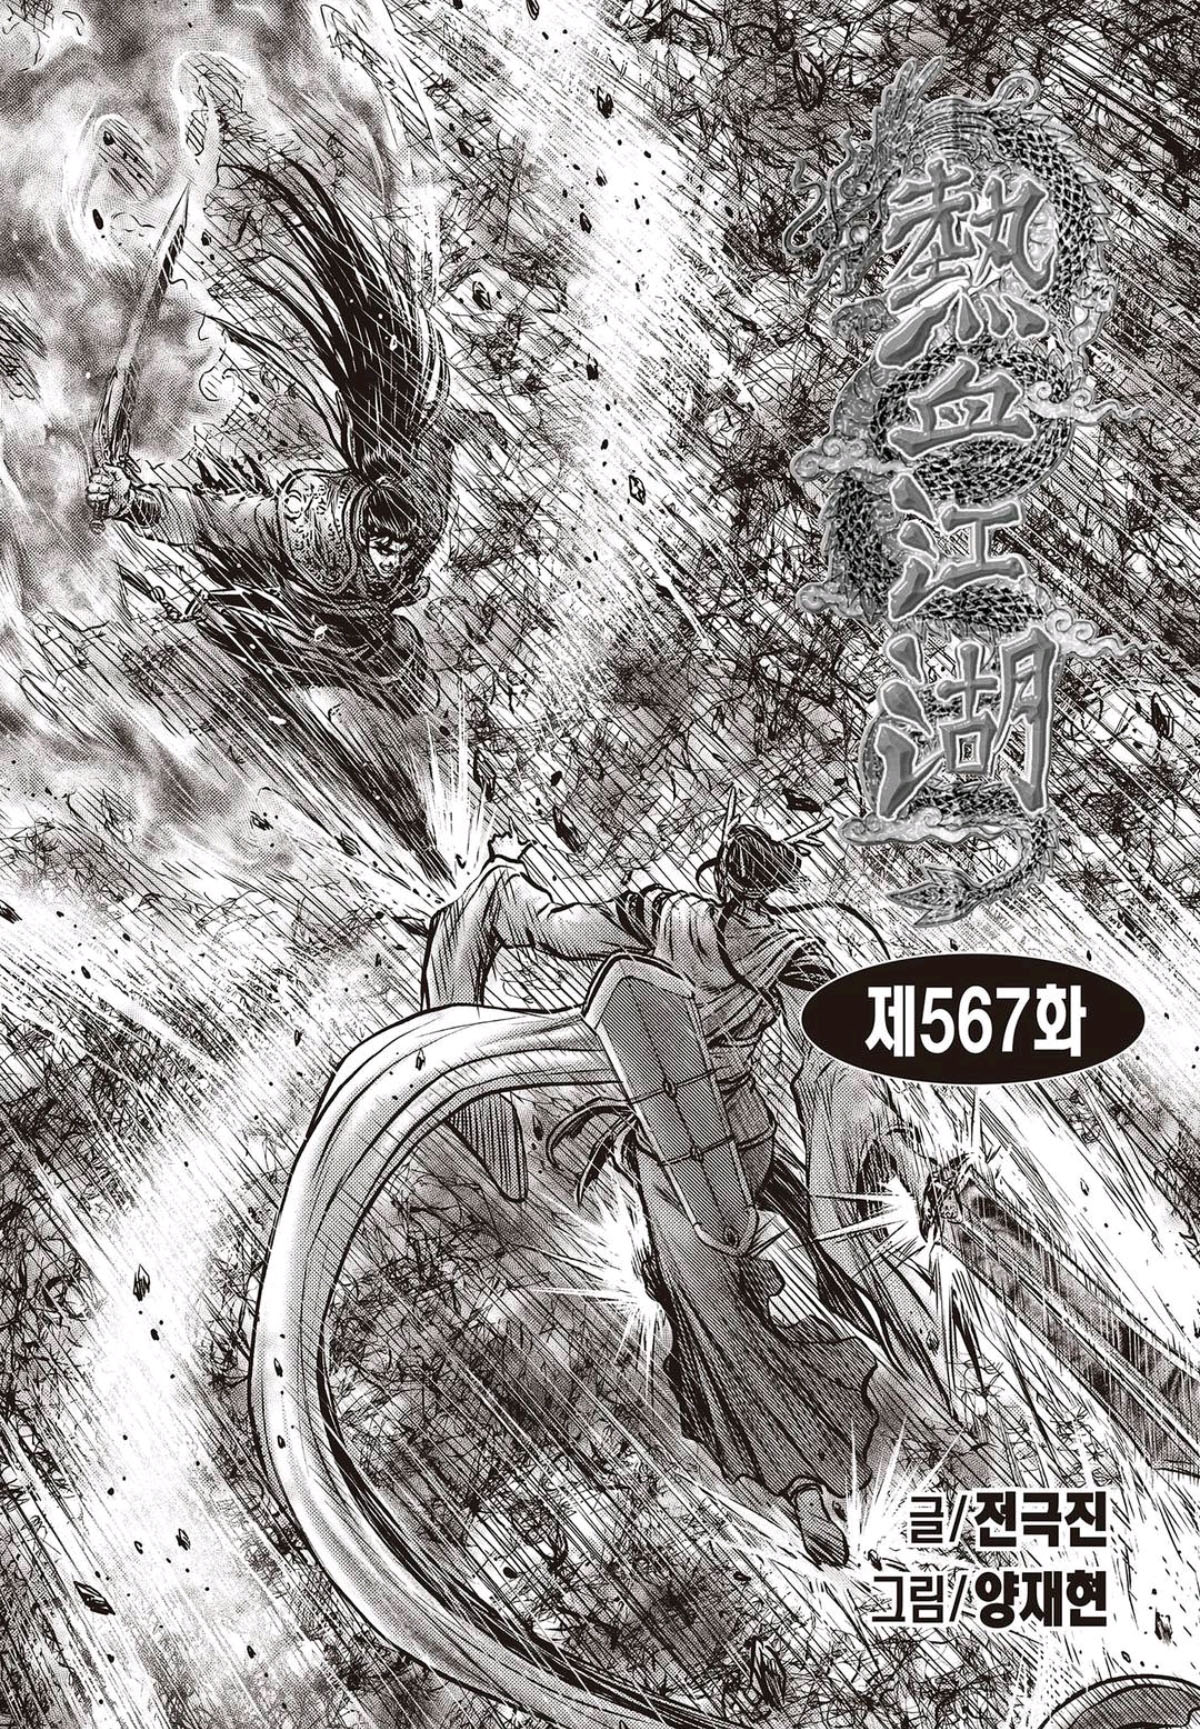 Ruler of the Land Vol.79 Chapter 567